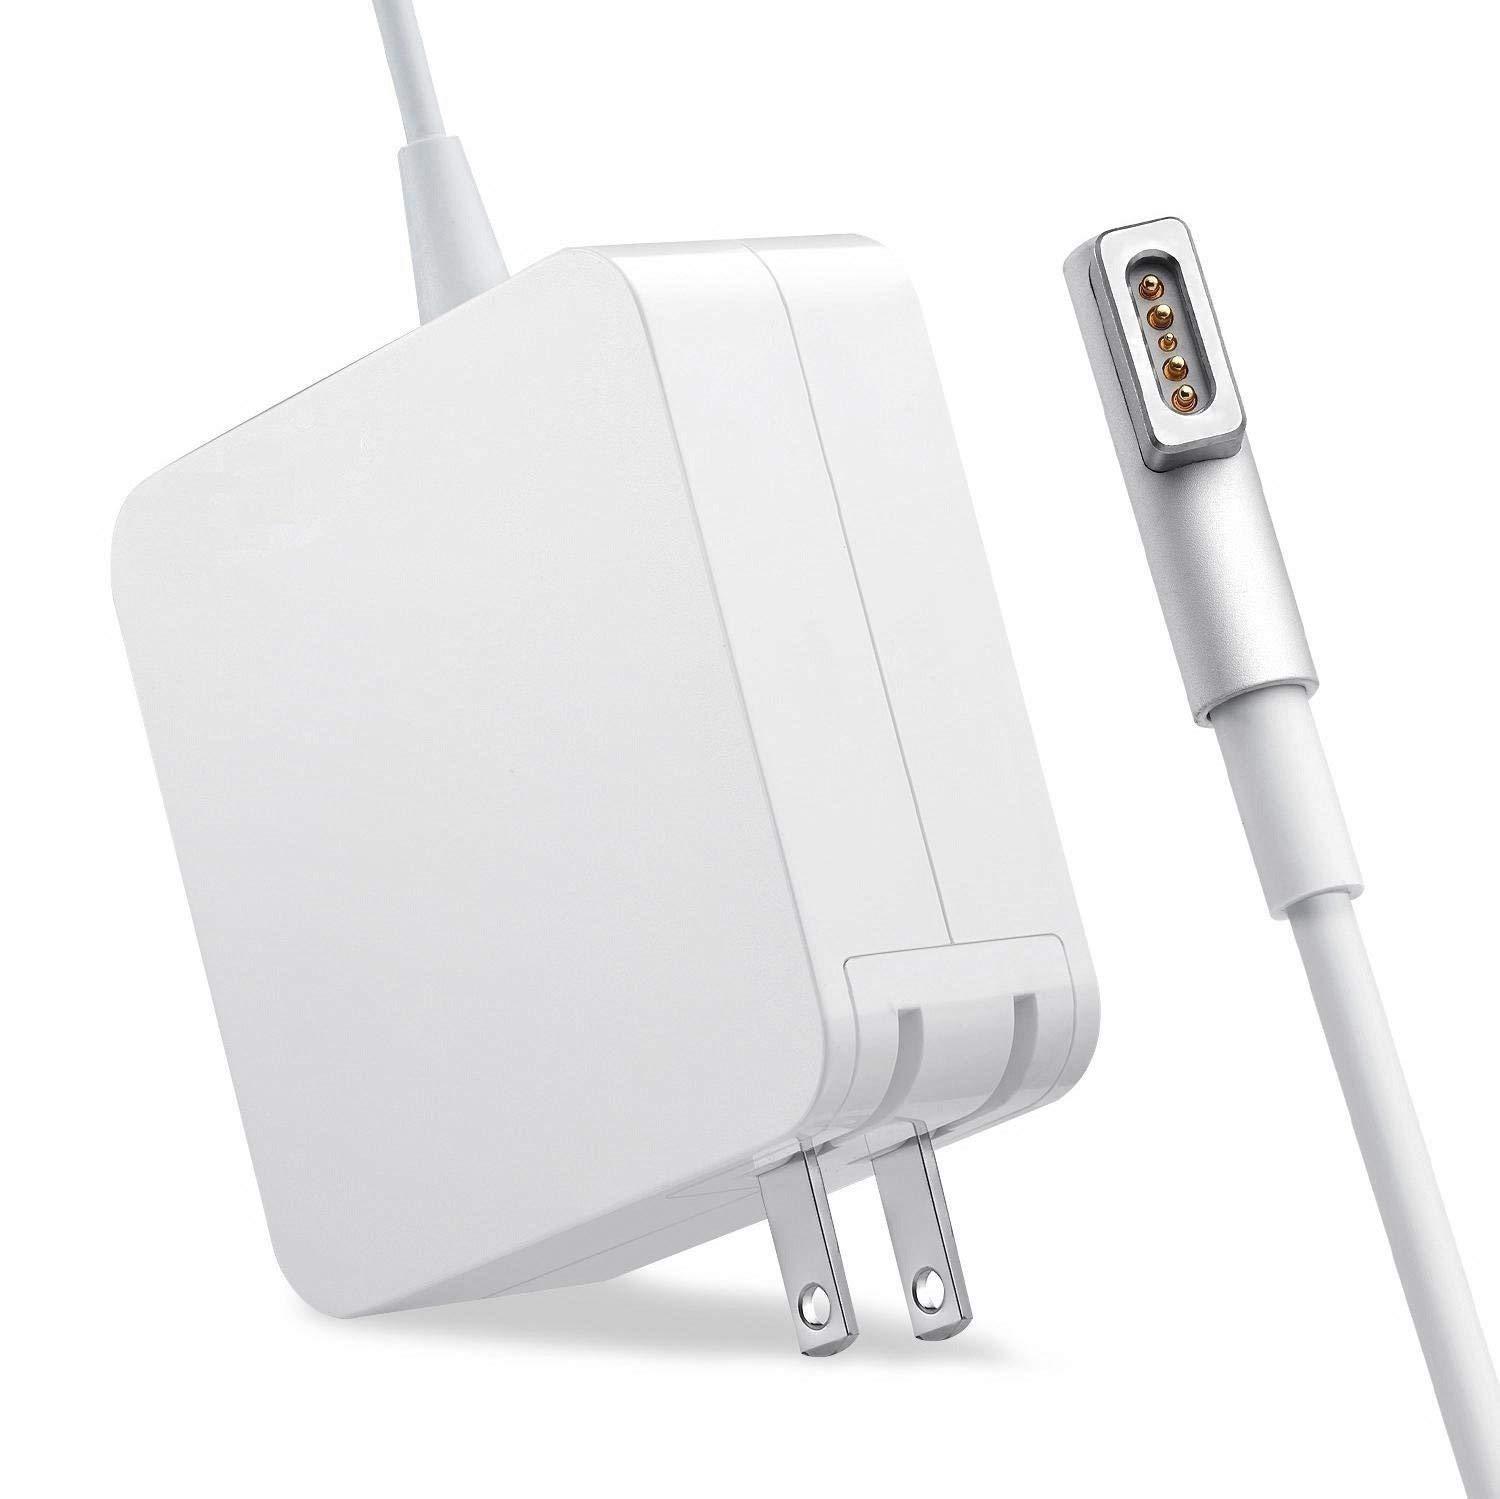 Macbook Pro Charger 60w Magsafe Power Adapter for Apple Macbook Dispaly